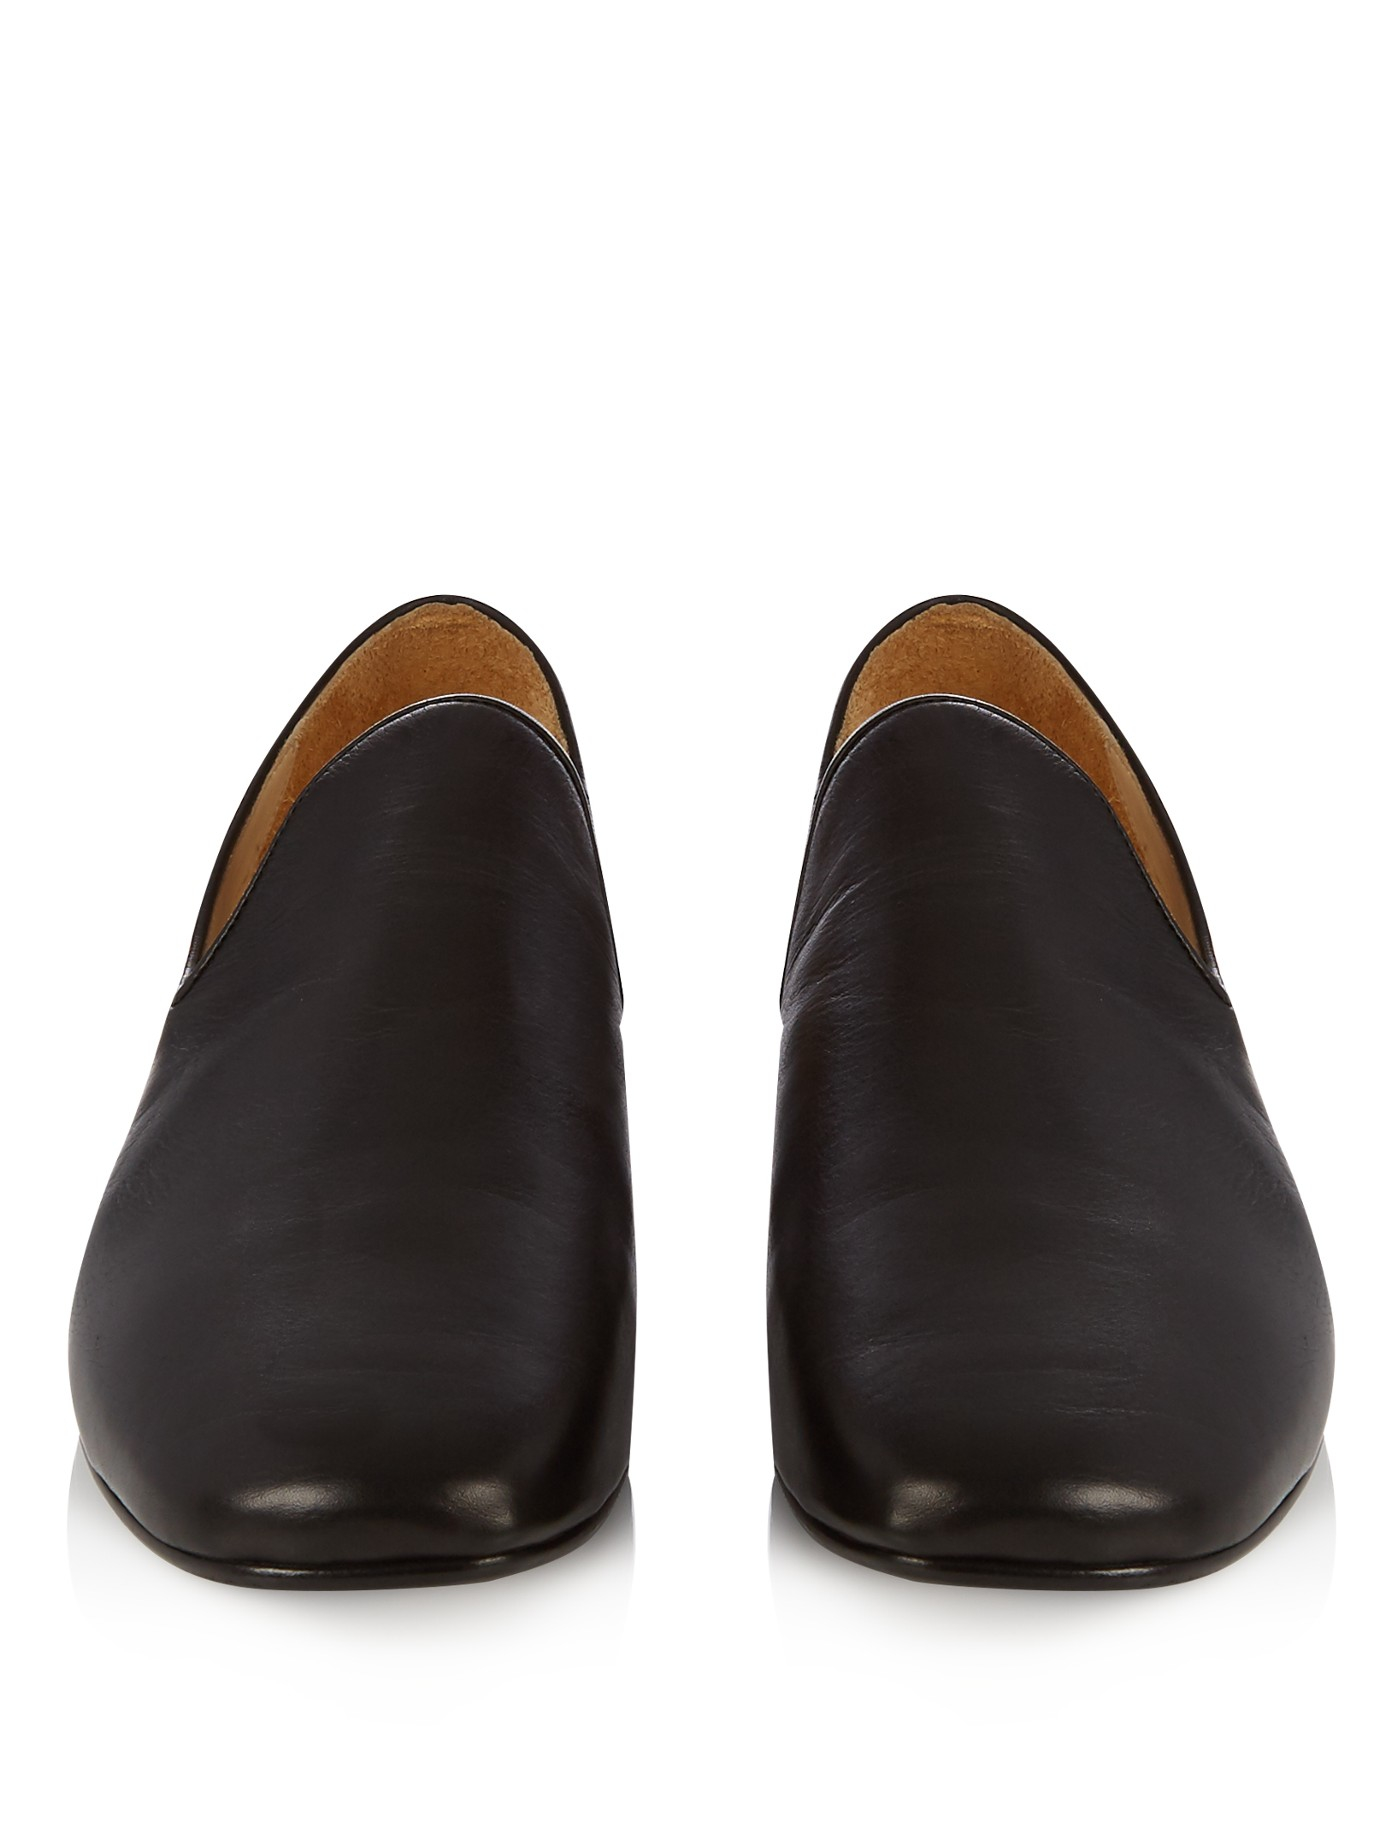 Lyst - Lemaire Soft-leather Loafers in Black for Men